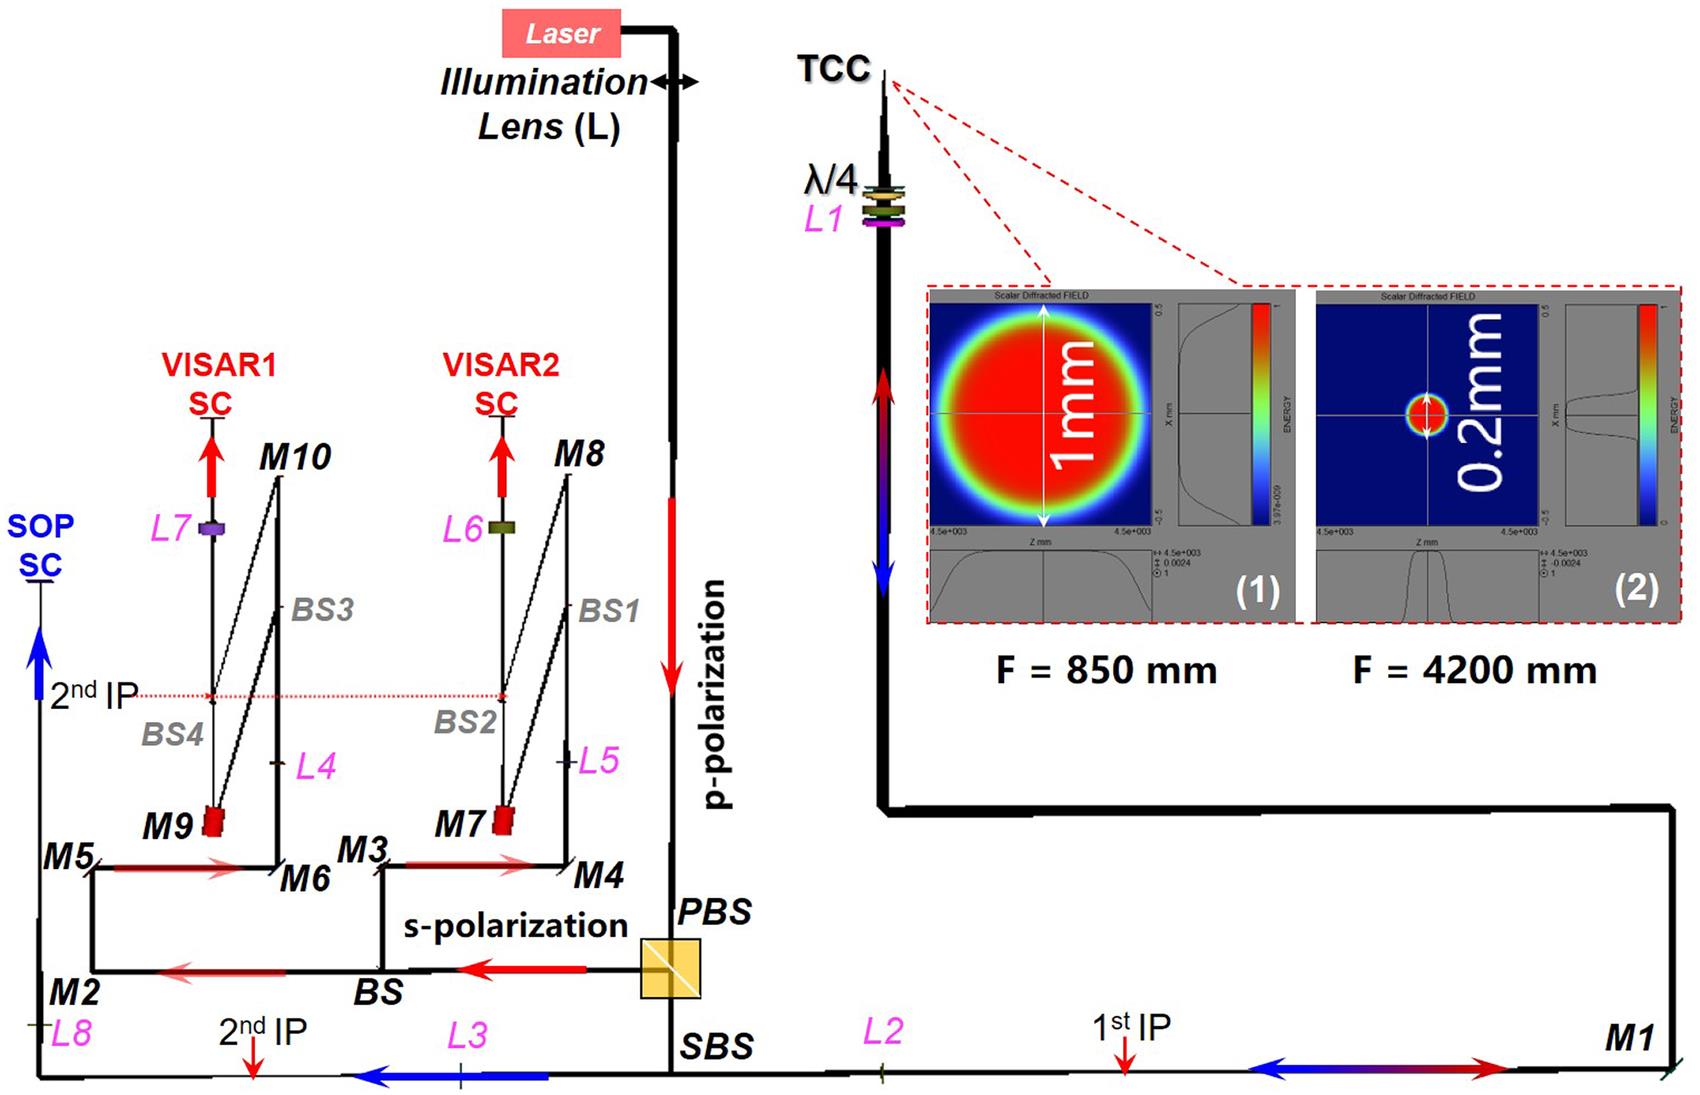 The optical ray tracing of the system. The collected signal lights including the reflected VISAR probe laser beam and the self-emission are transported onto the optical table. When it arrives at the SBS, the signal is split into two recording paths, the interferometer section (red arrow) and the SOP section (blue arrow). The insets show the designed spot sizes with different illumination lenses at the same position. L, lens; M, mirror; IP, imaging position; BS, beam splitter; PBS, polarization beam splitter; SBS, special beam splitter (dichroic mirror); TCC, target chamber center; SC, streak camera.